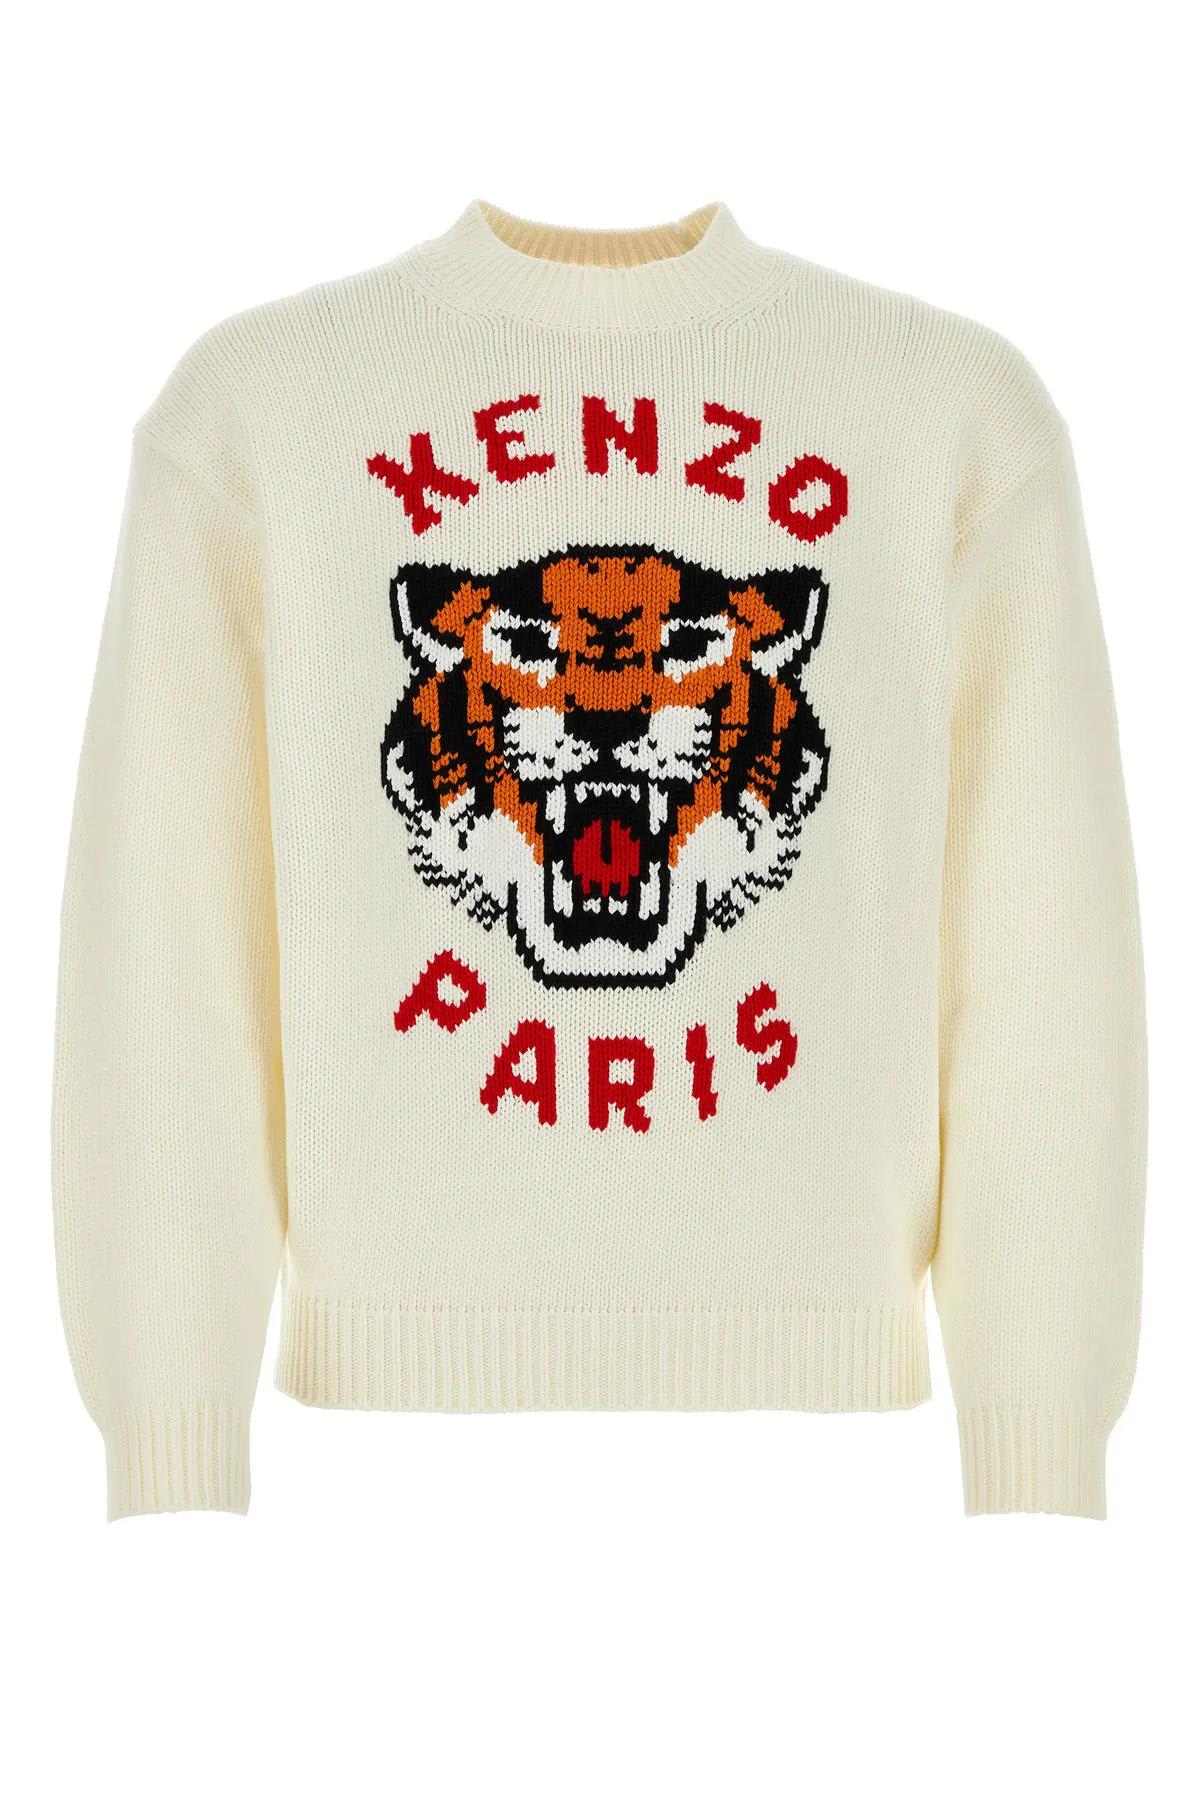 Kenzo Ivory Cotton Blend Sweater In Neutral